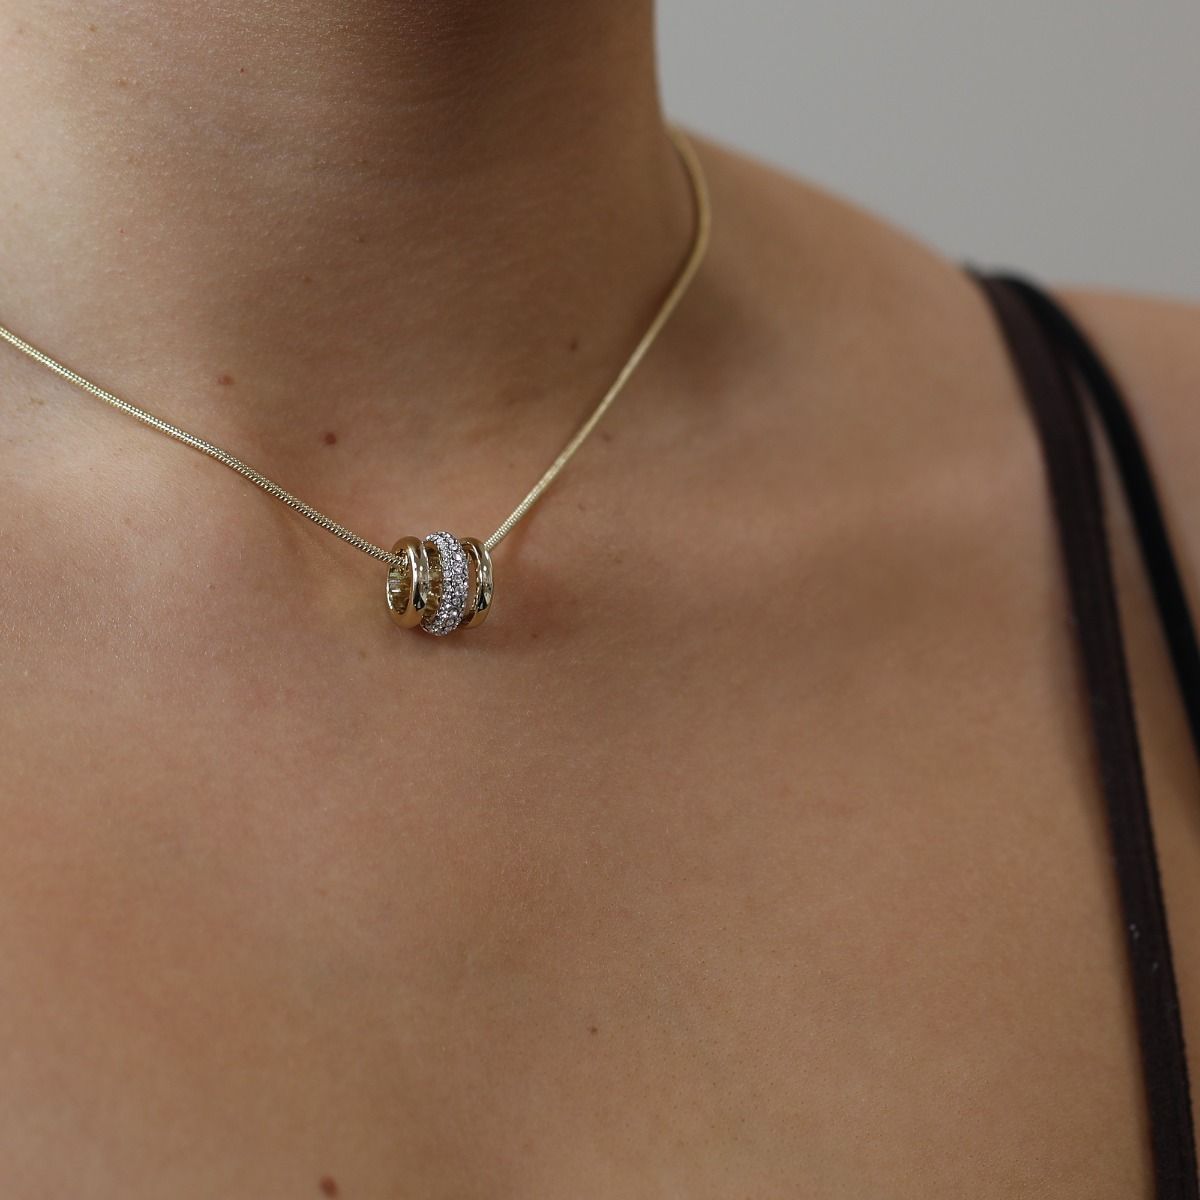 Simple and chic, the Aspire pendant is the perfect accessory for any outfit. Suspended from a sleek gold plated snake chain, the pendant features shimmering pave set crystals set into rhodium plating, wrapped between two bands of polished gold plate. Wear